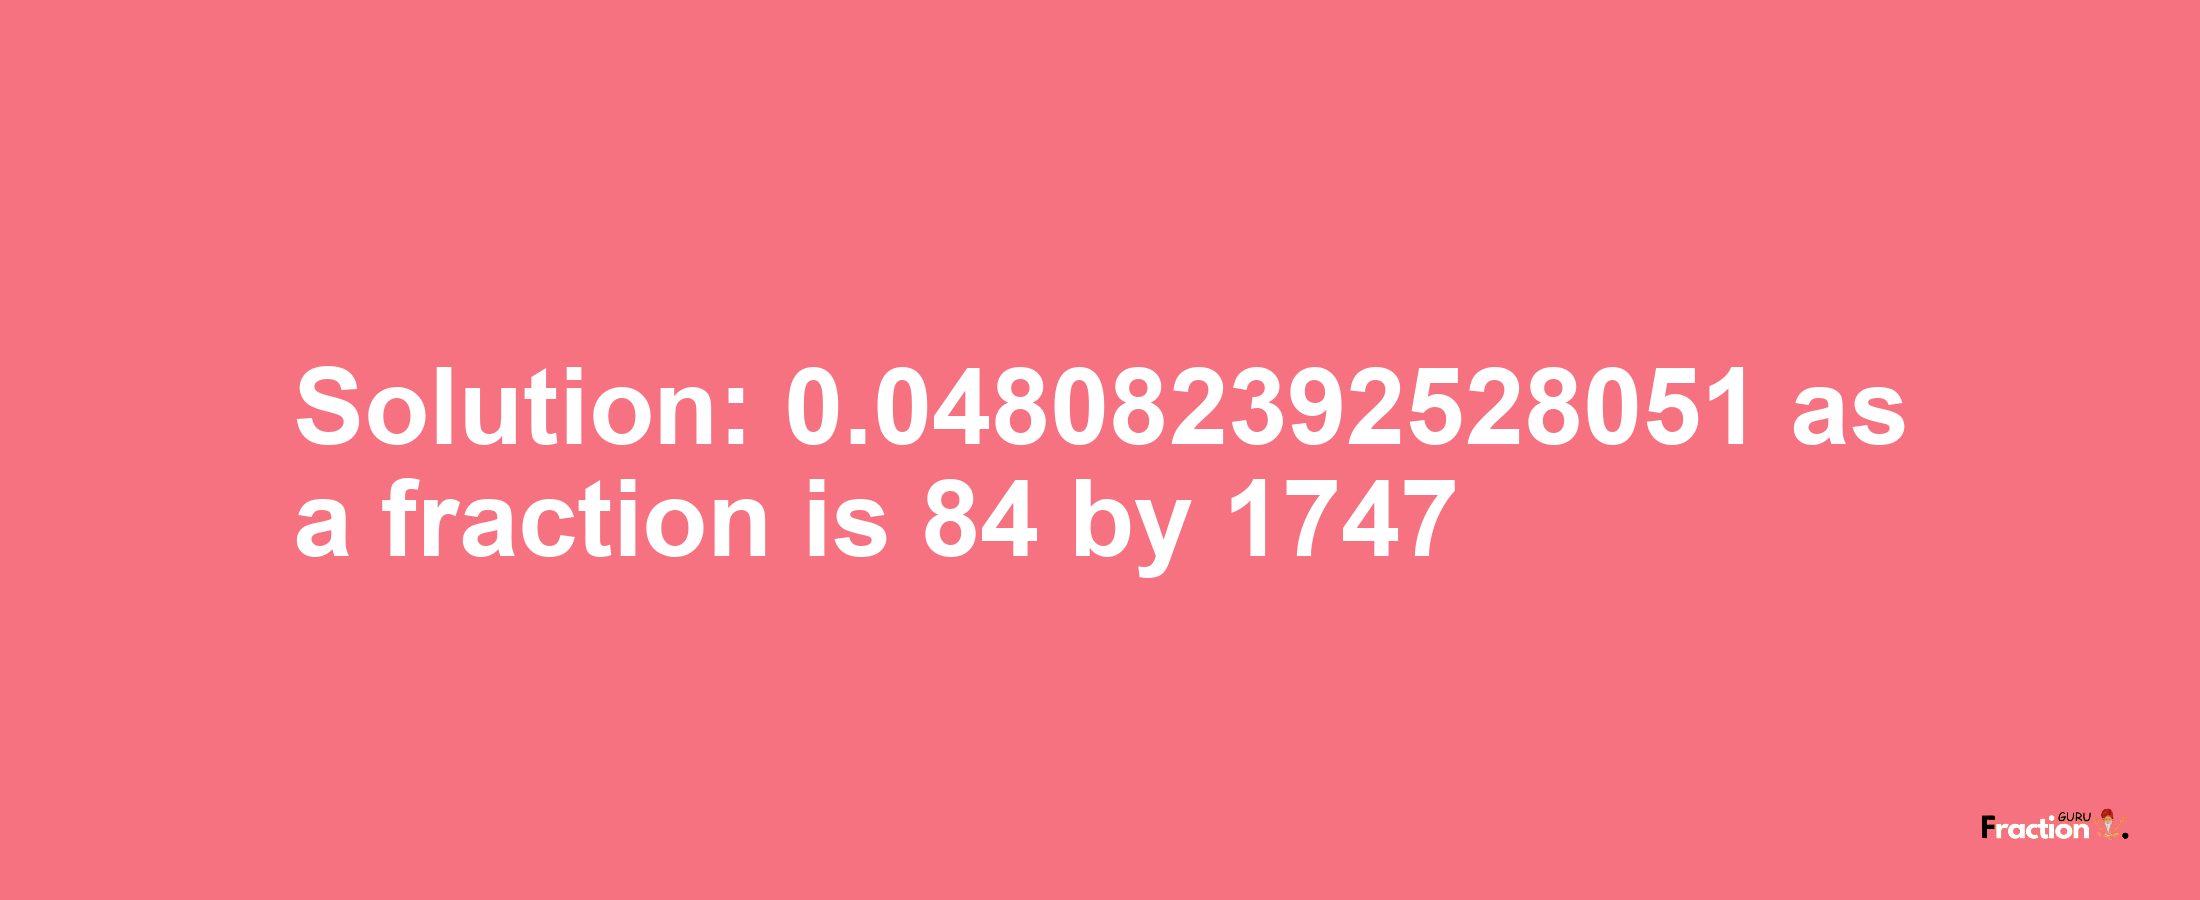 Solution:0.048082392528051 as a fraction is 84/1747